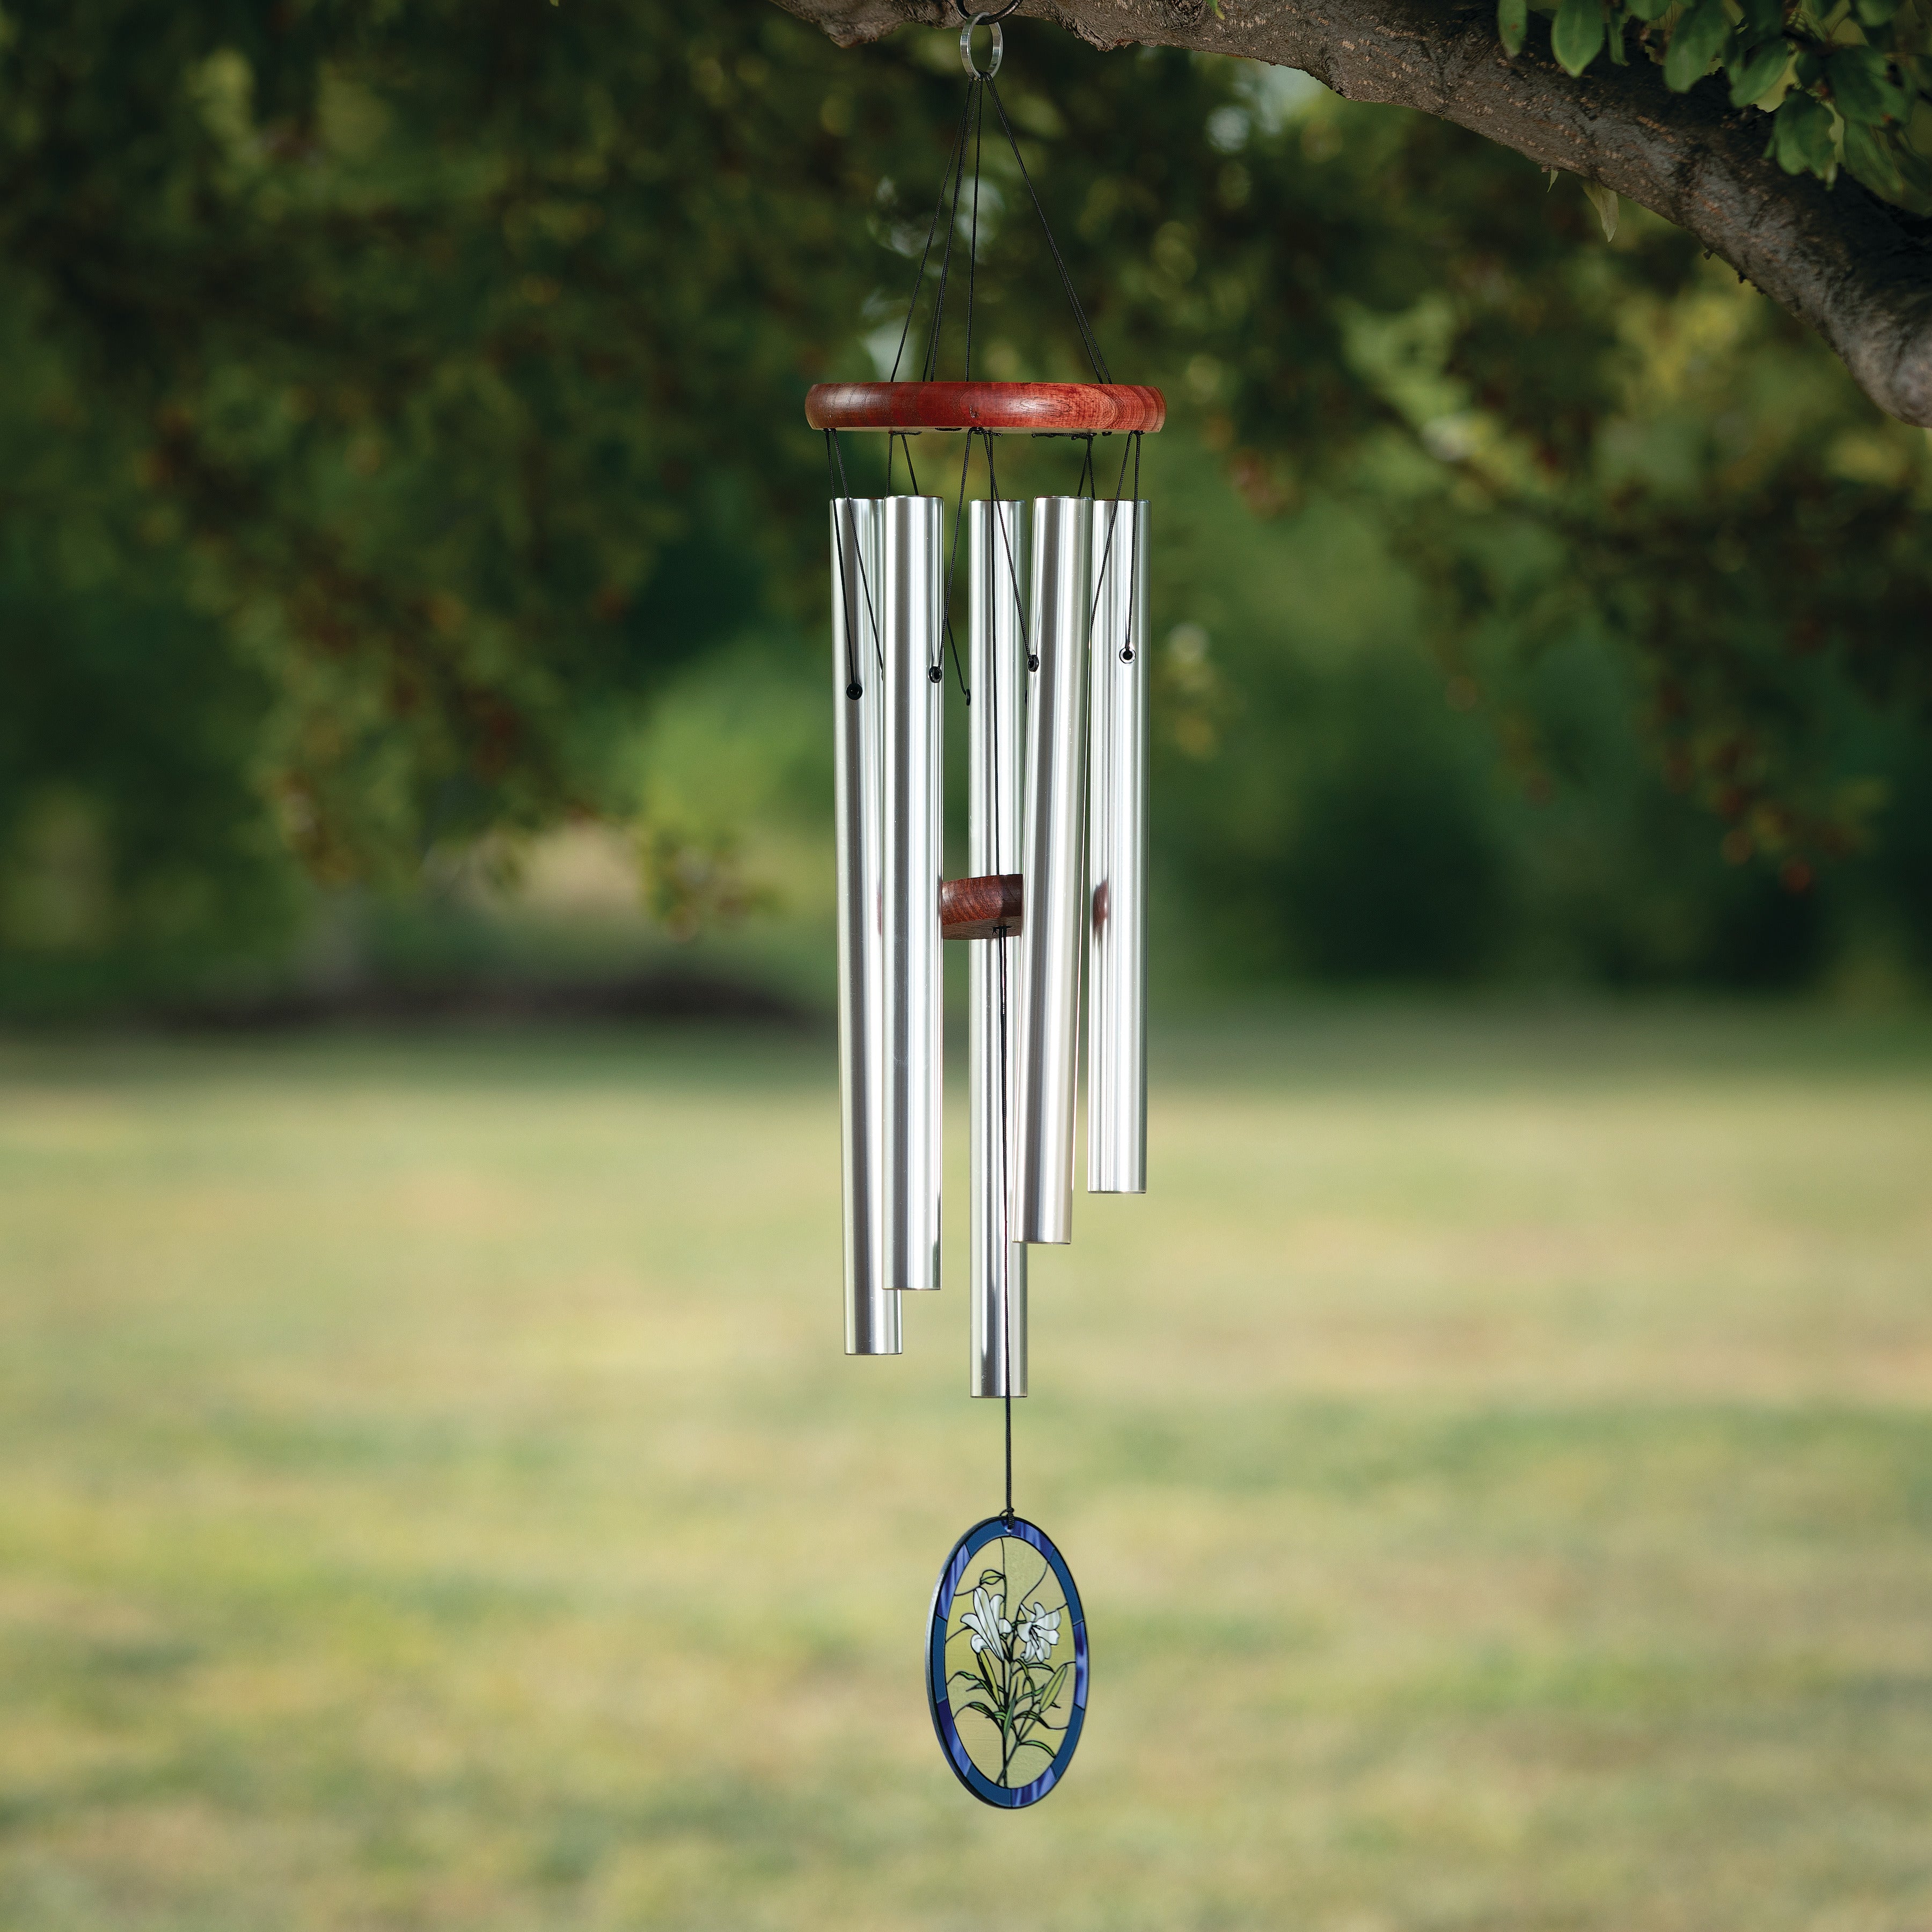 Woodstock Décor Chime™ - Lily